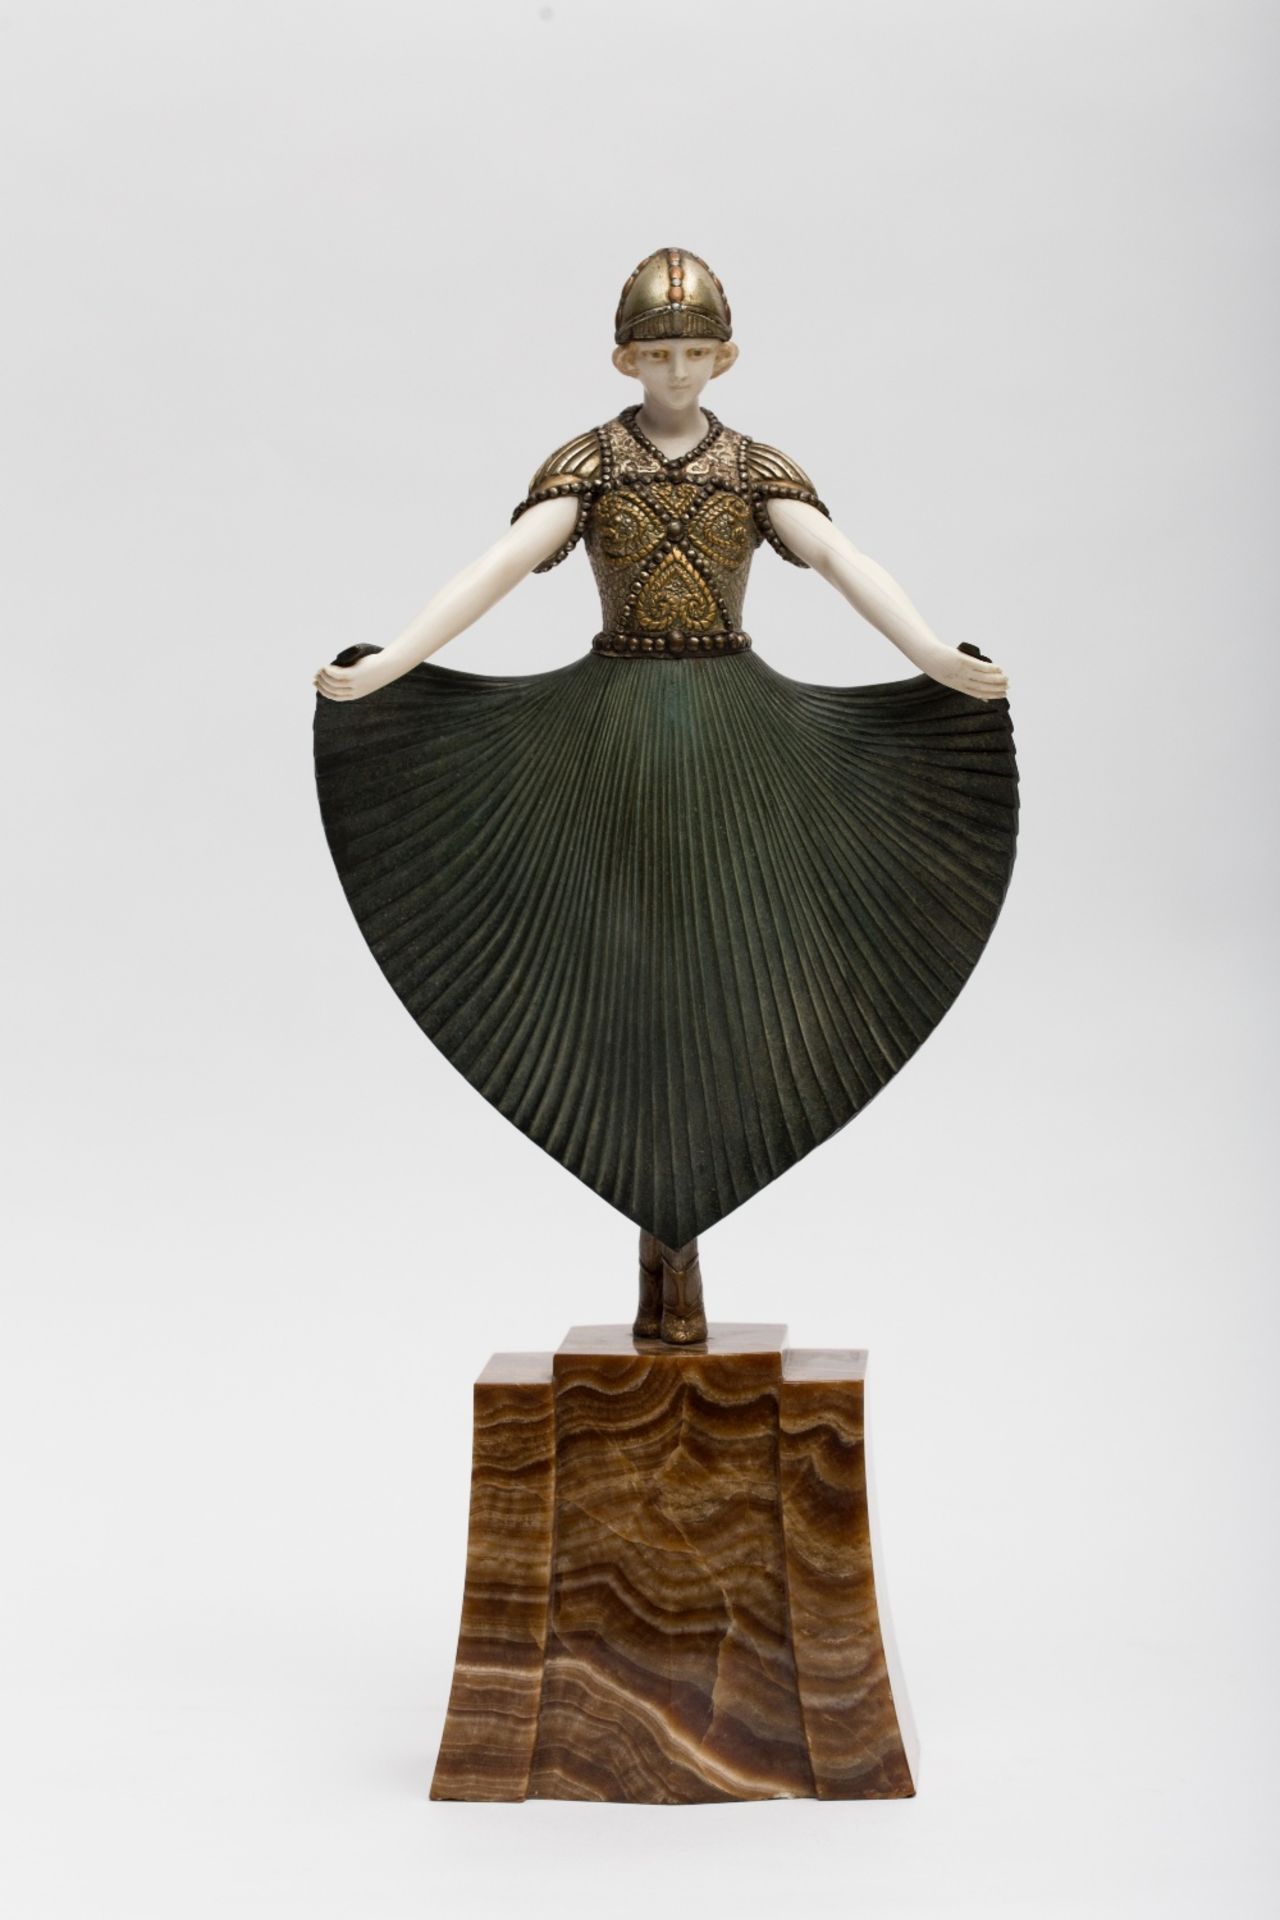 Demeter Haralamb Chiparus (1886-1947) Actress; Chryselephantine sculpture in bronze with multiple